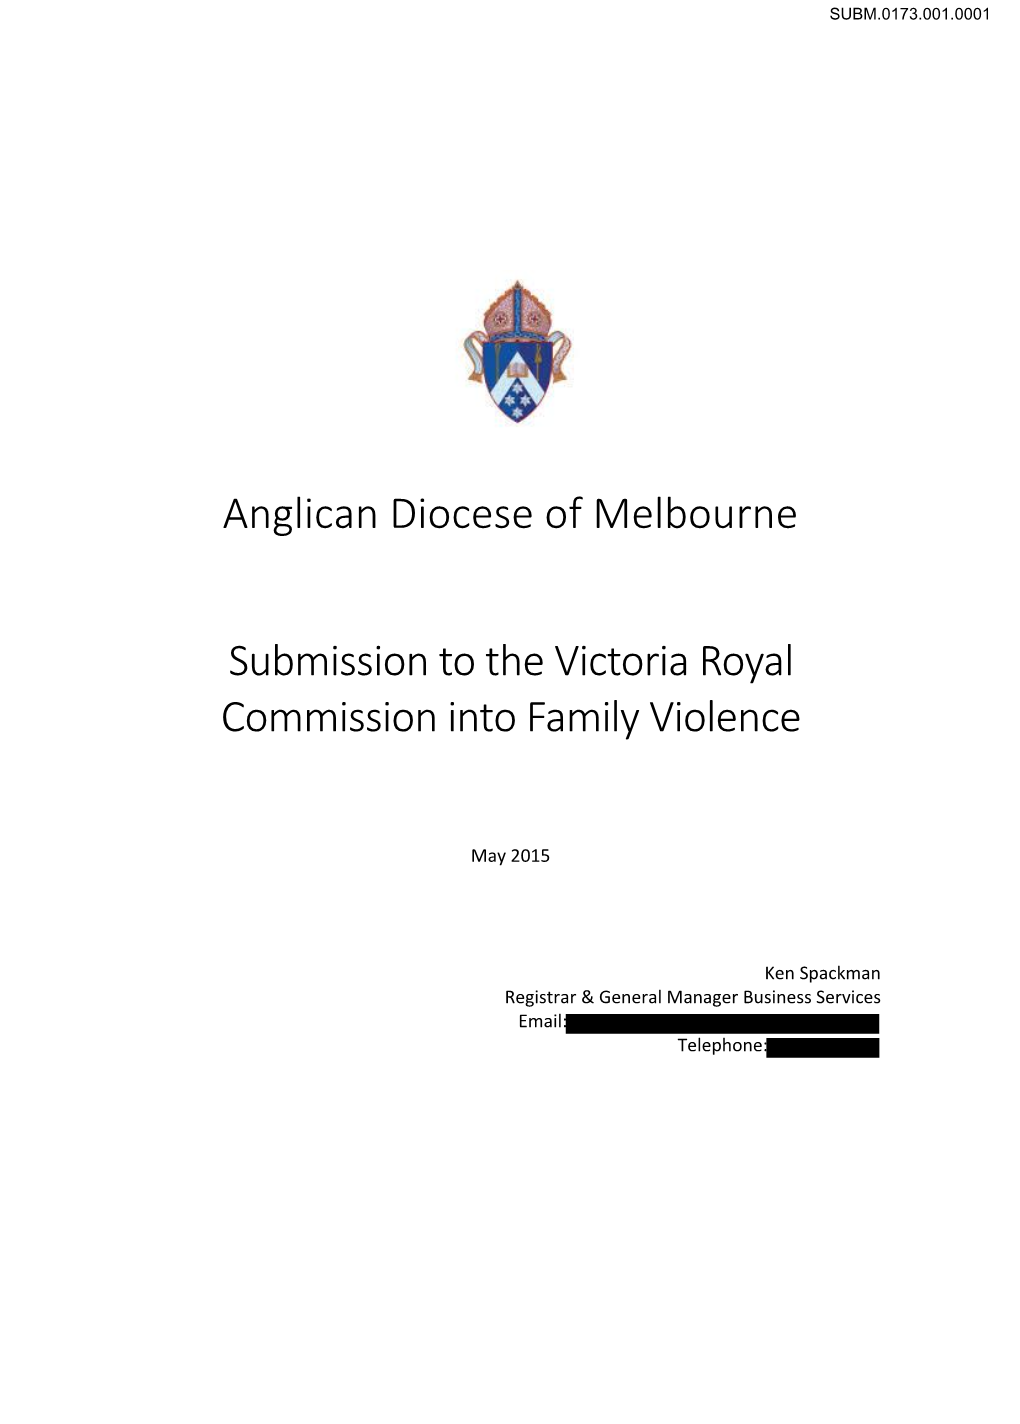 Anglican Diocese of Melbourne Submission to the Victoria Royal Commission Into Family Violence